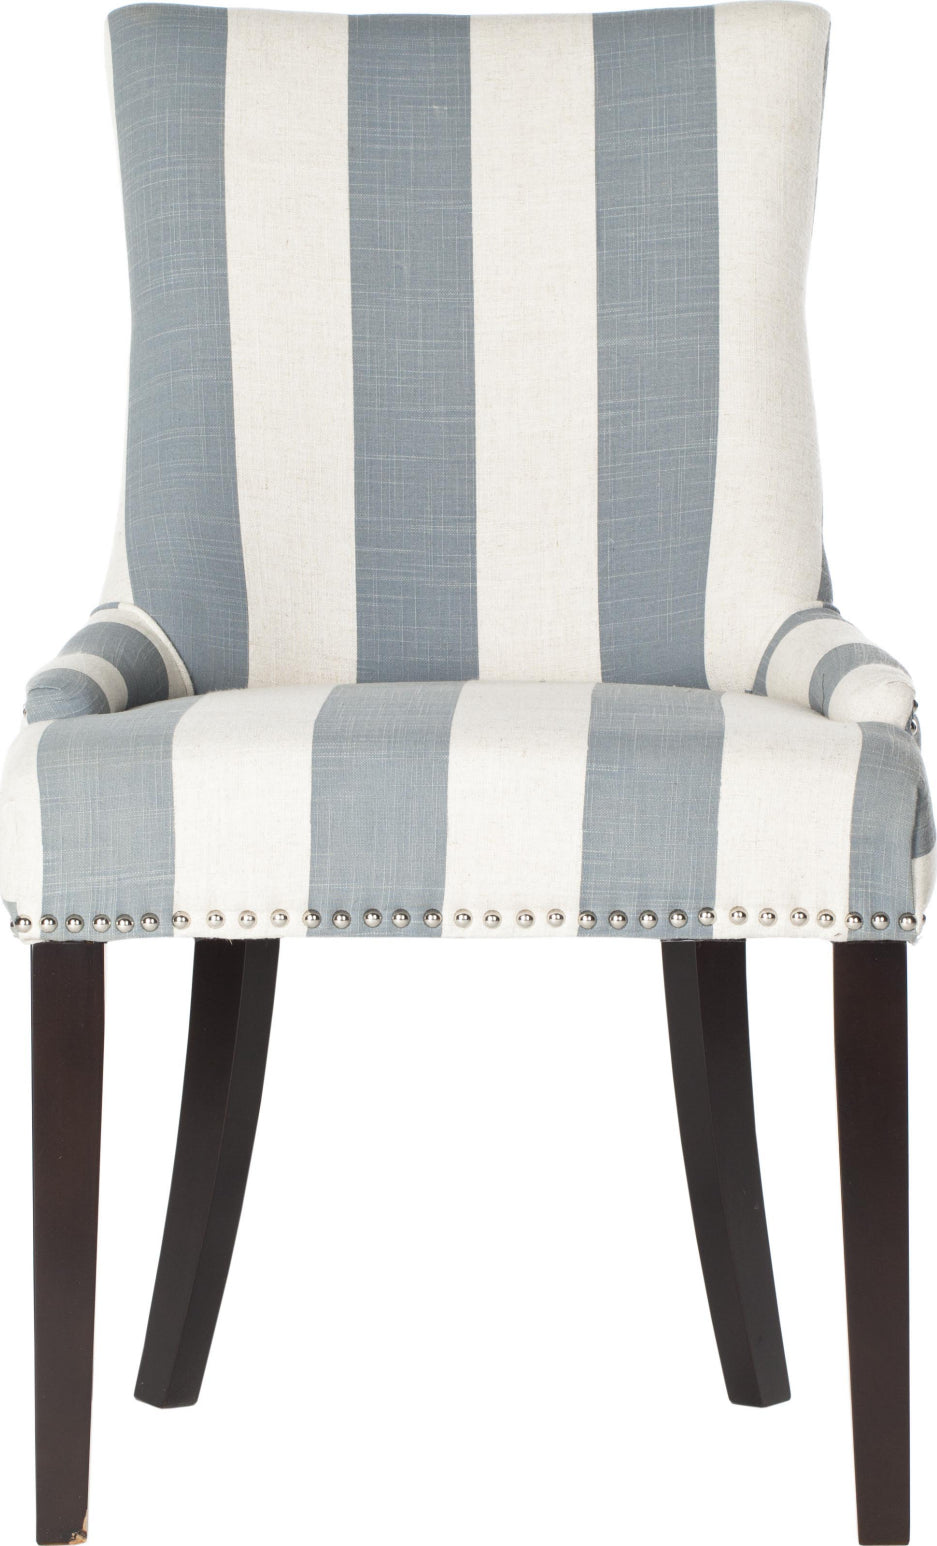 Safavieh Lester 19''H Awning Stripes Dining Chair-Silver Nail Heads Grey and White Espresso Furniture main image